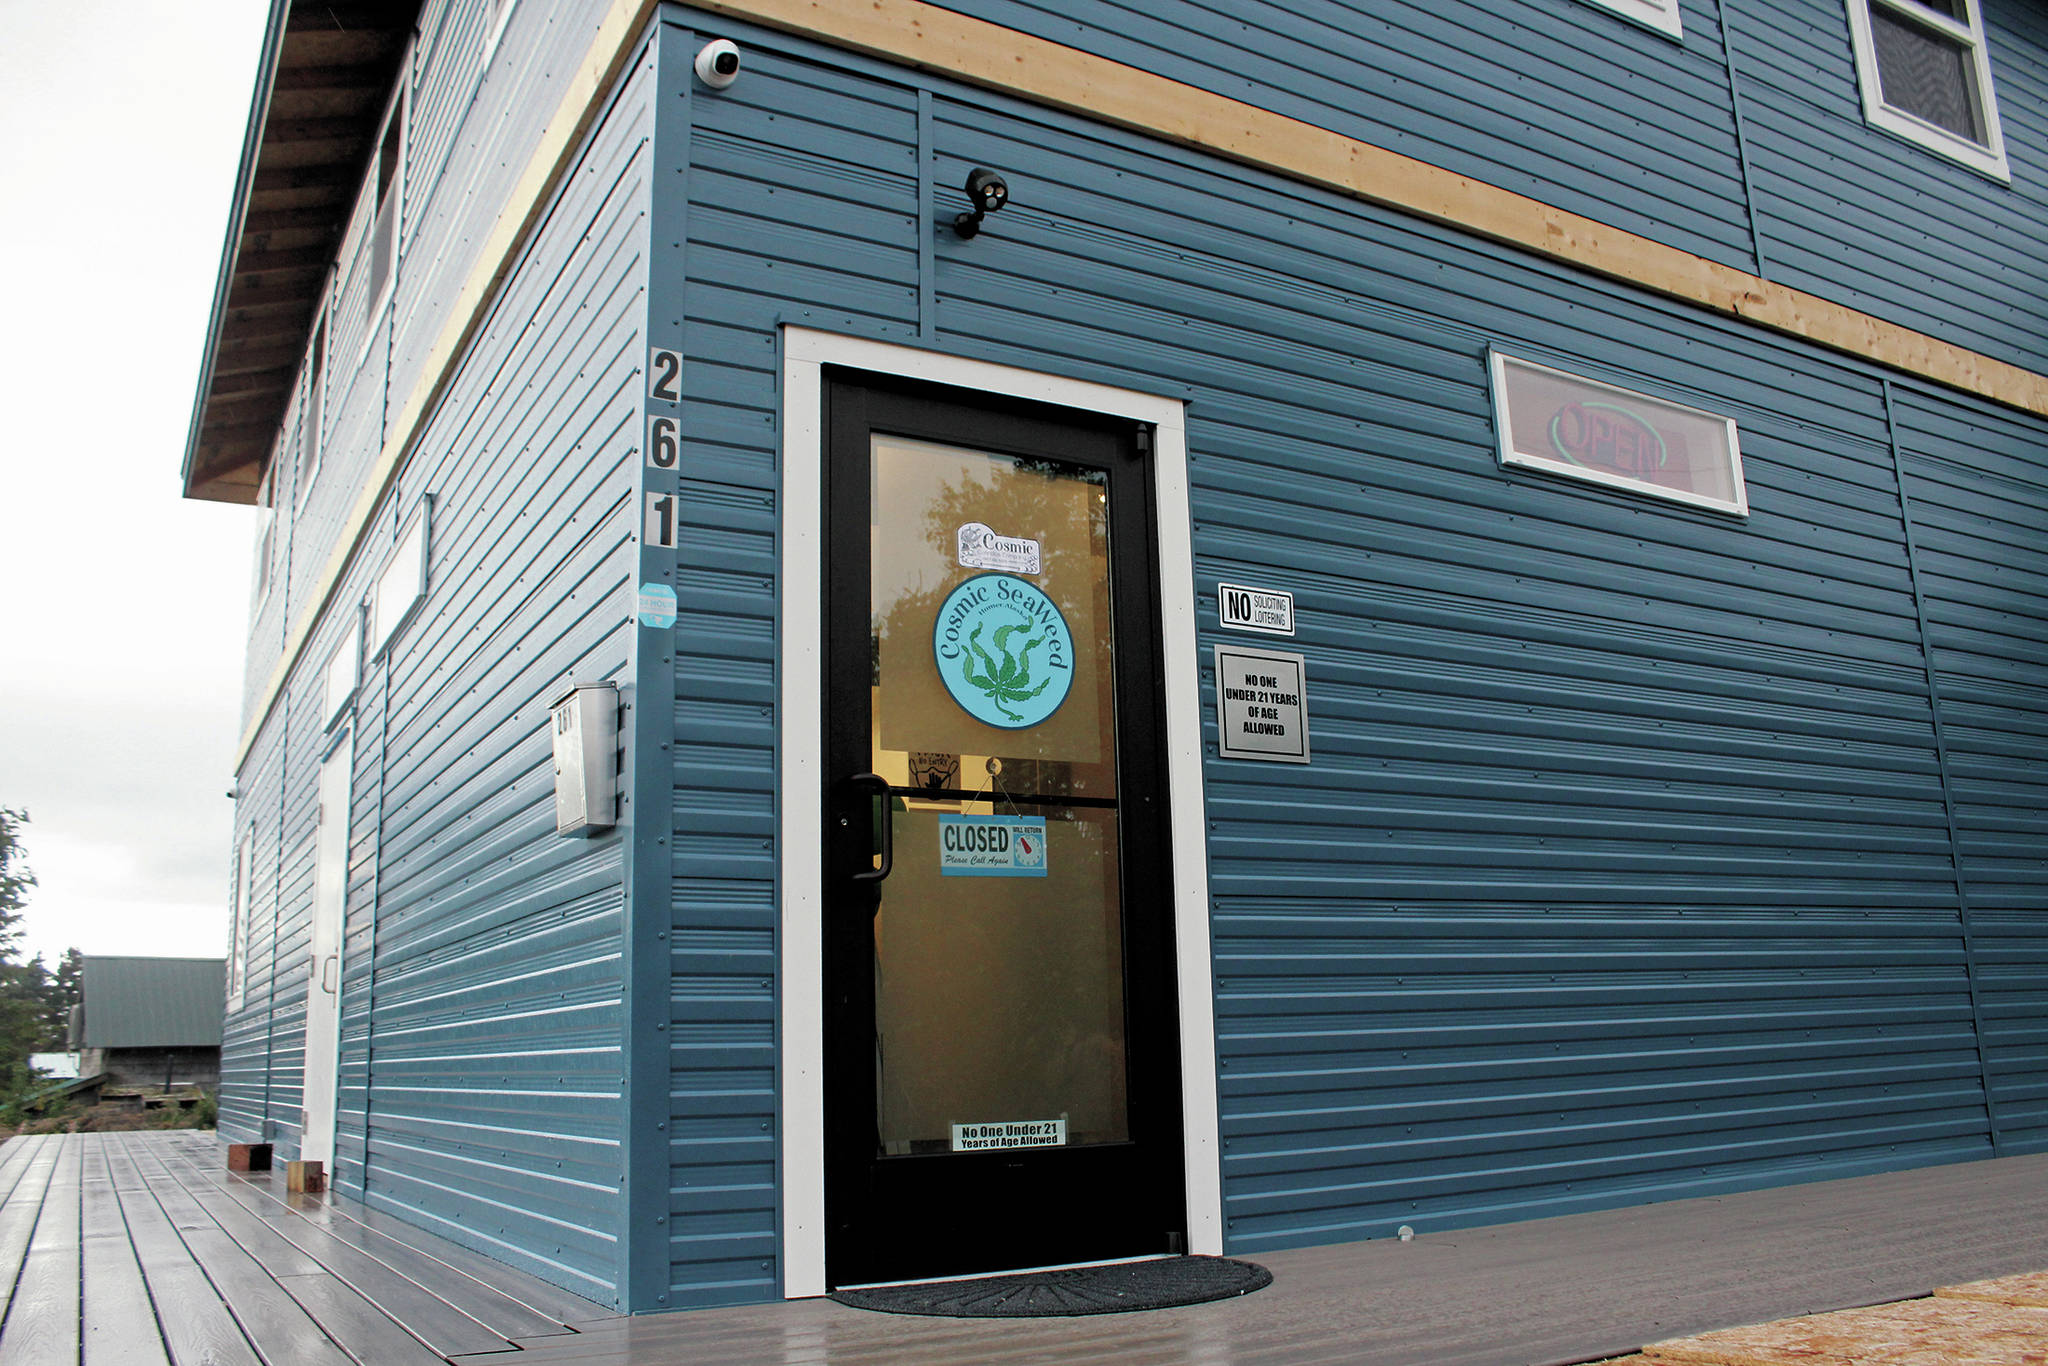 Cosmic Cannabis Company sits ready for customers on East Bunnell Avenue in Old Town on Tuesday, Sept. 15, 2020 in Homer, Alaska. (Photo by Megan Pacer/Homer News)